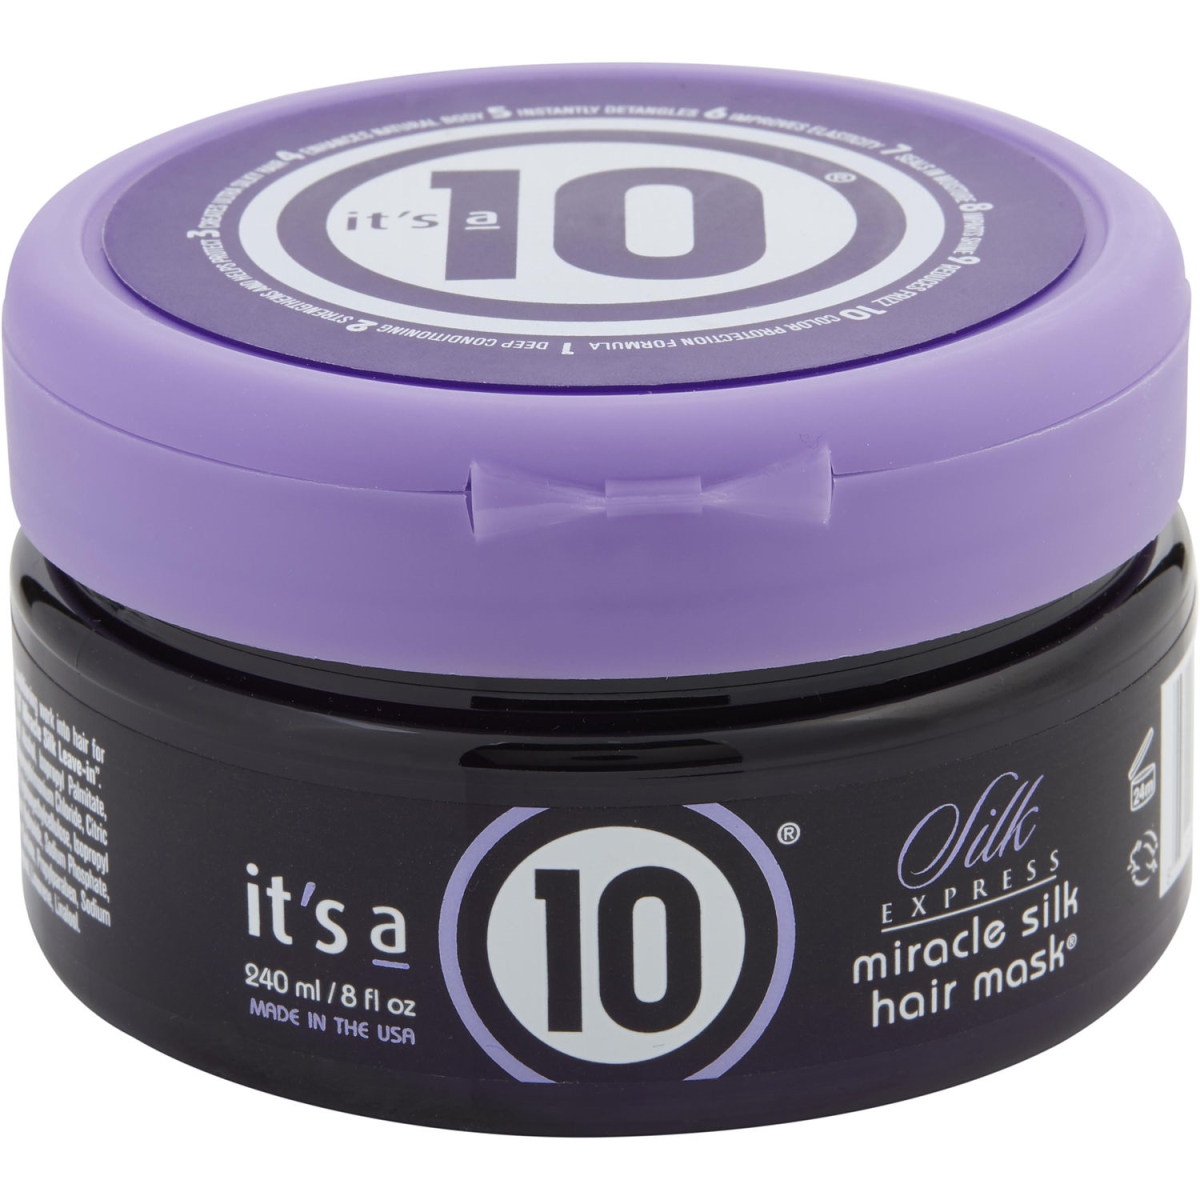 Its A 10 300064 8 Oz Unisex Express Miracle Silk Hair Mask Conditioner